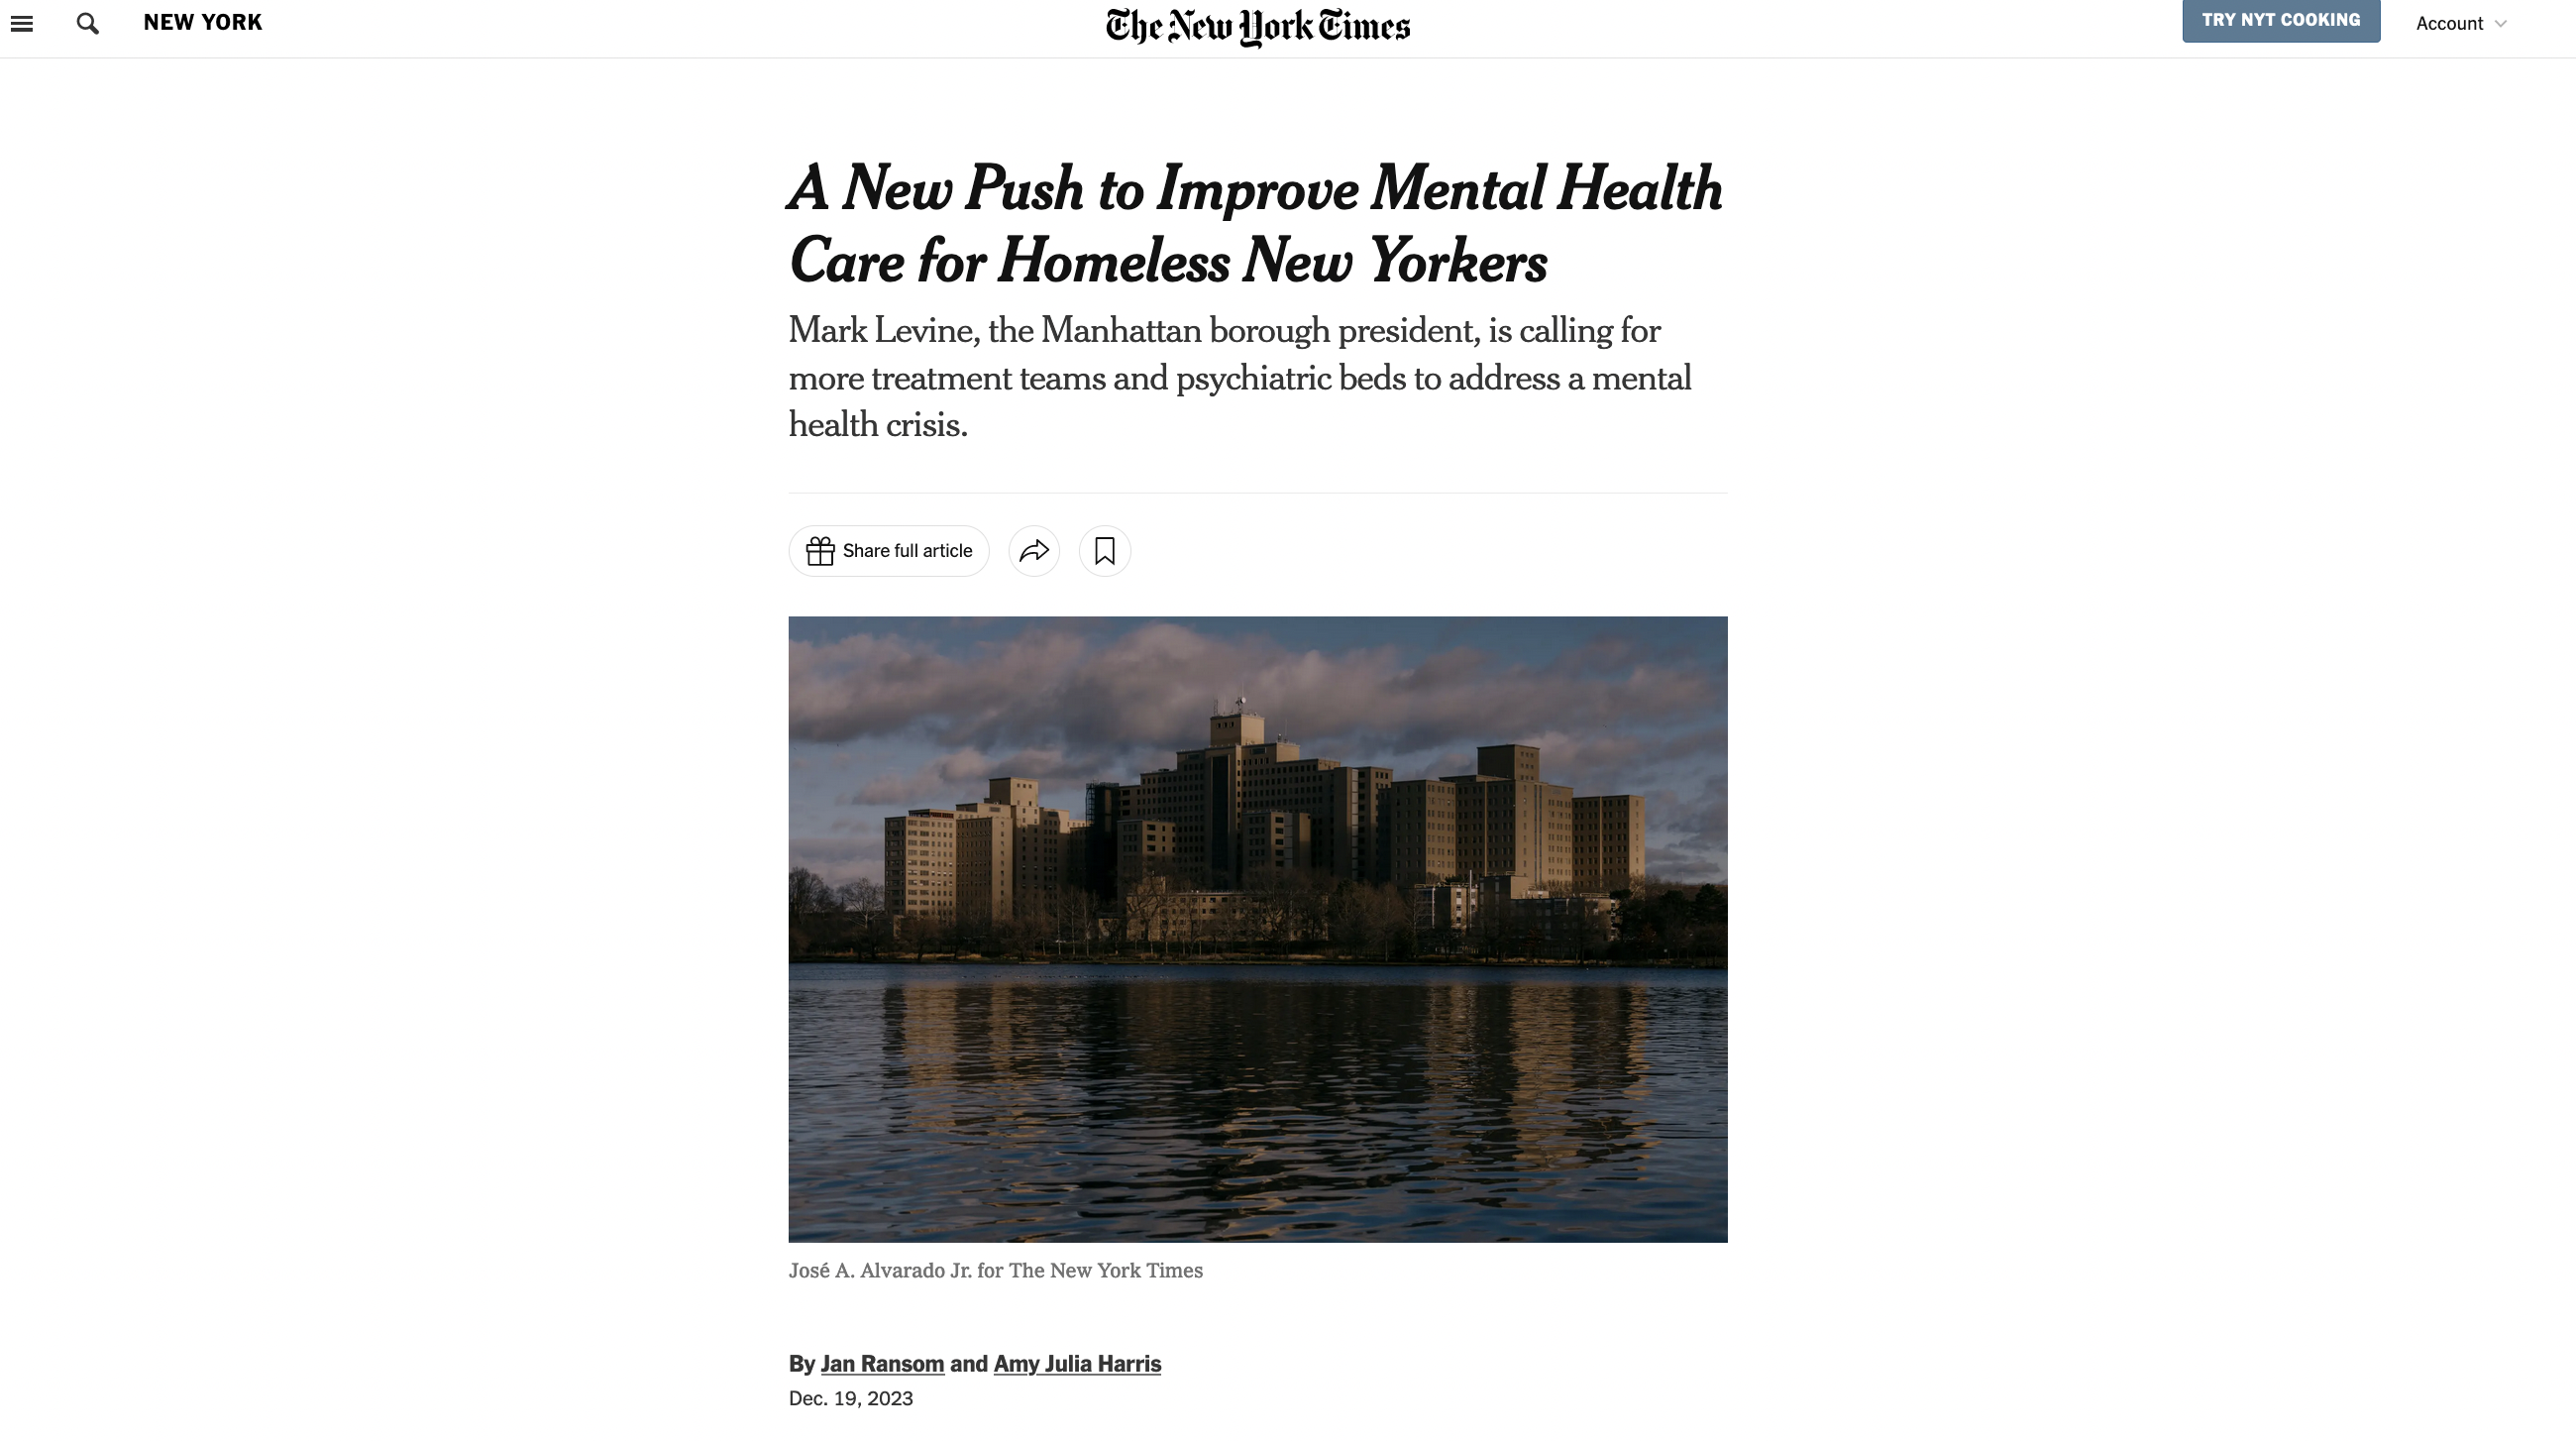 for The New York Times: A New Push to Improve Mental Health Care for Homeless New Yorkers